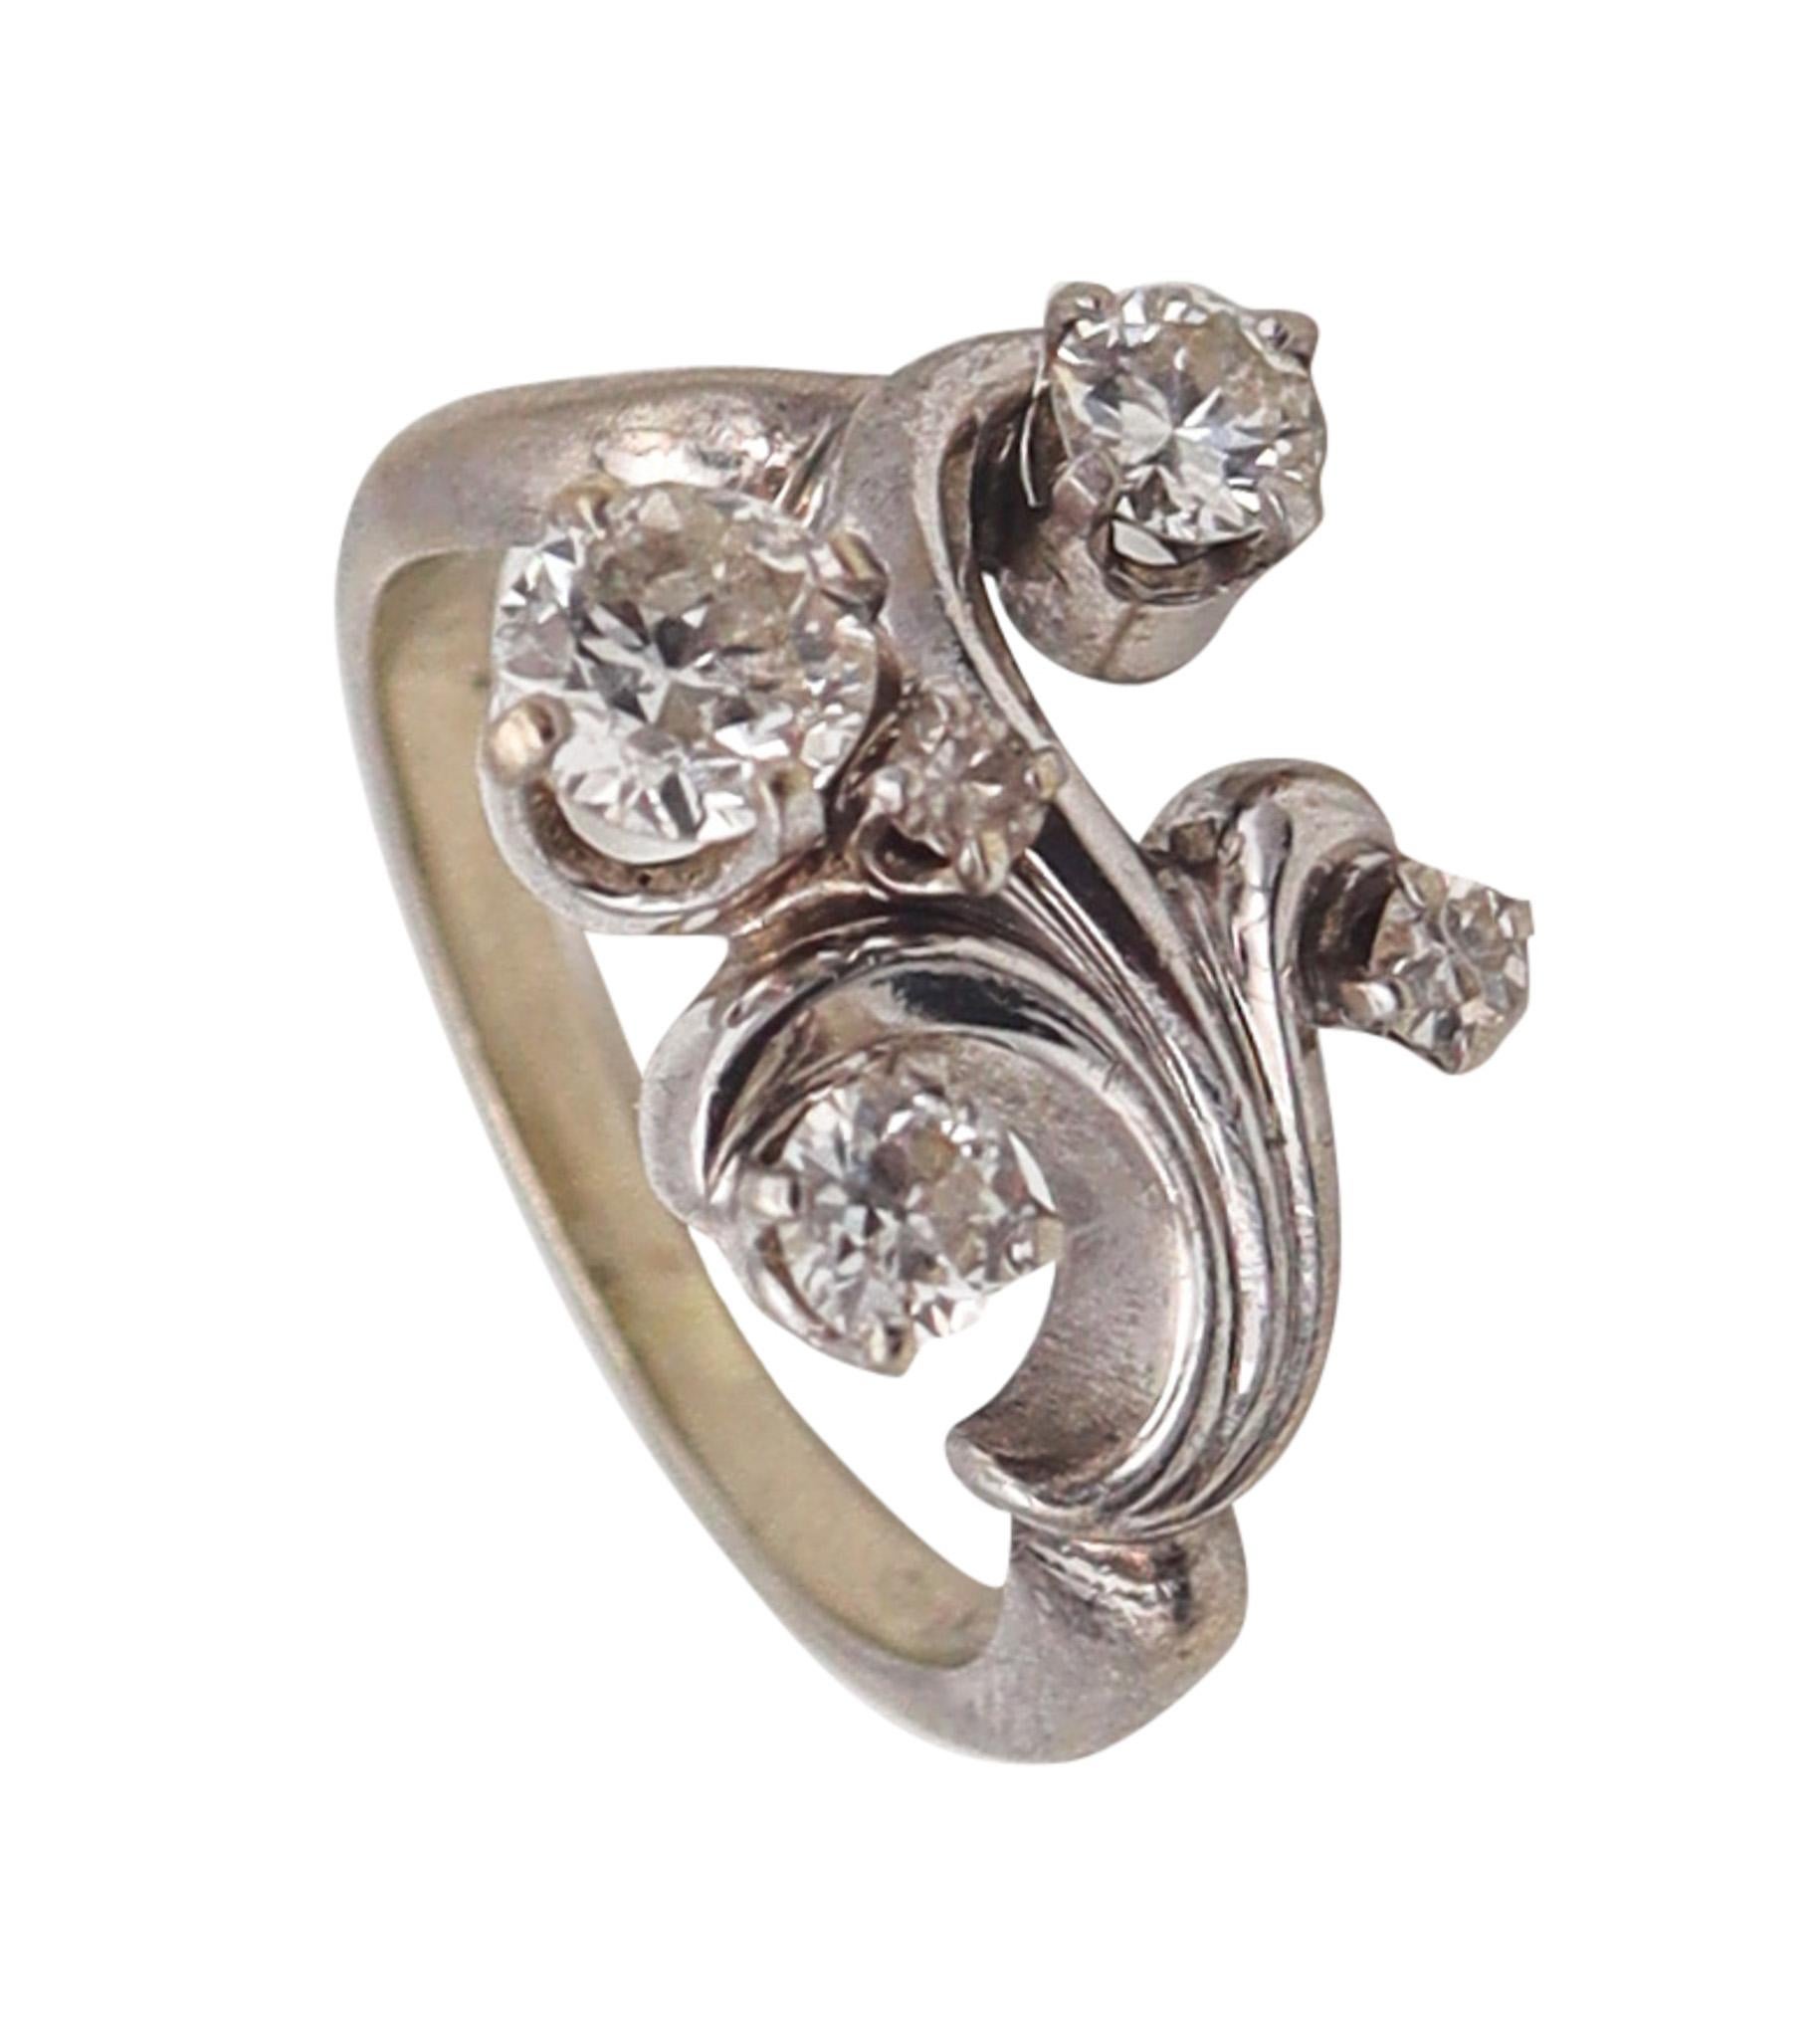 Art Deco Retro 1940 Swirl Ring In Solid 14Kt White Gold With Four White Diamonds